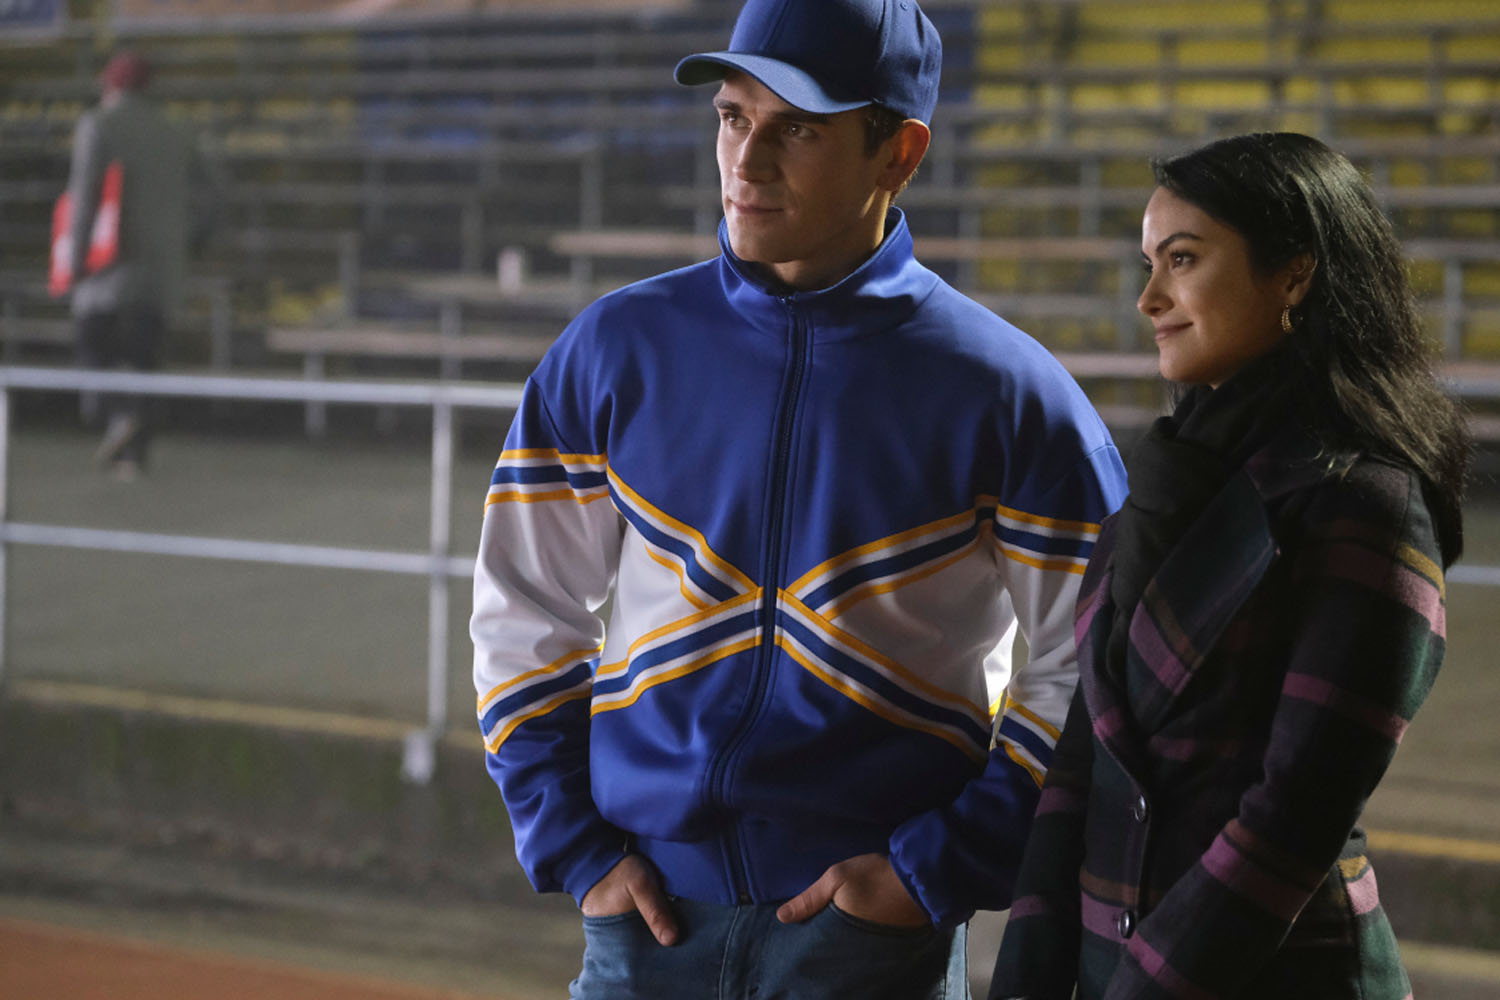 'Riverdale' season 5 episode 9 review: A disappointingly familiar show